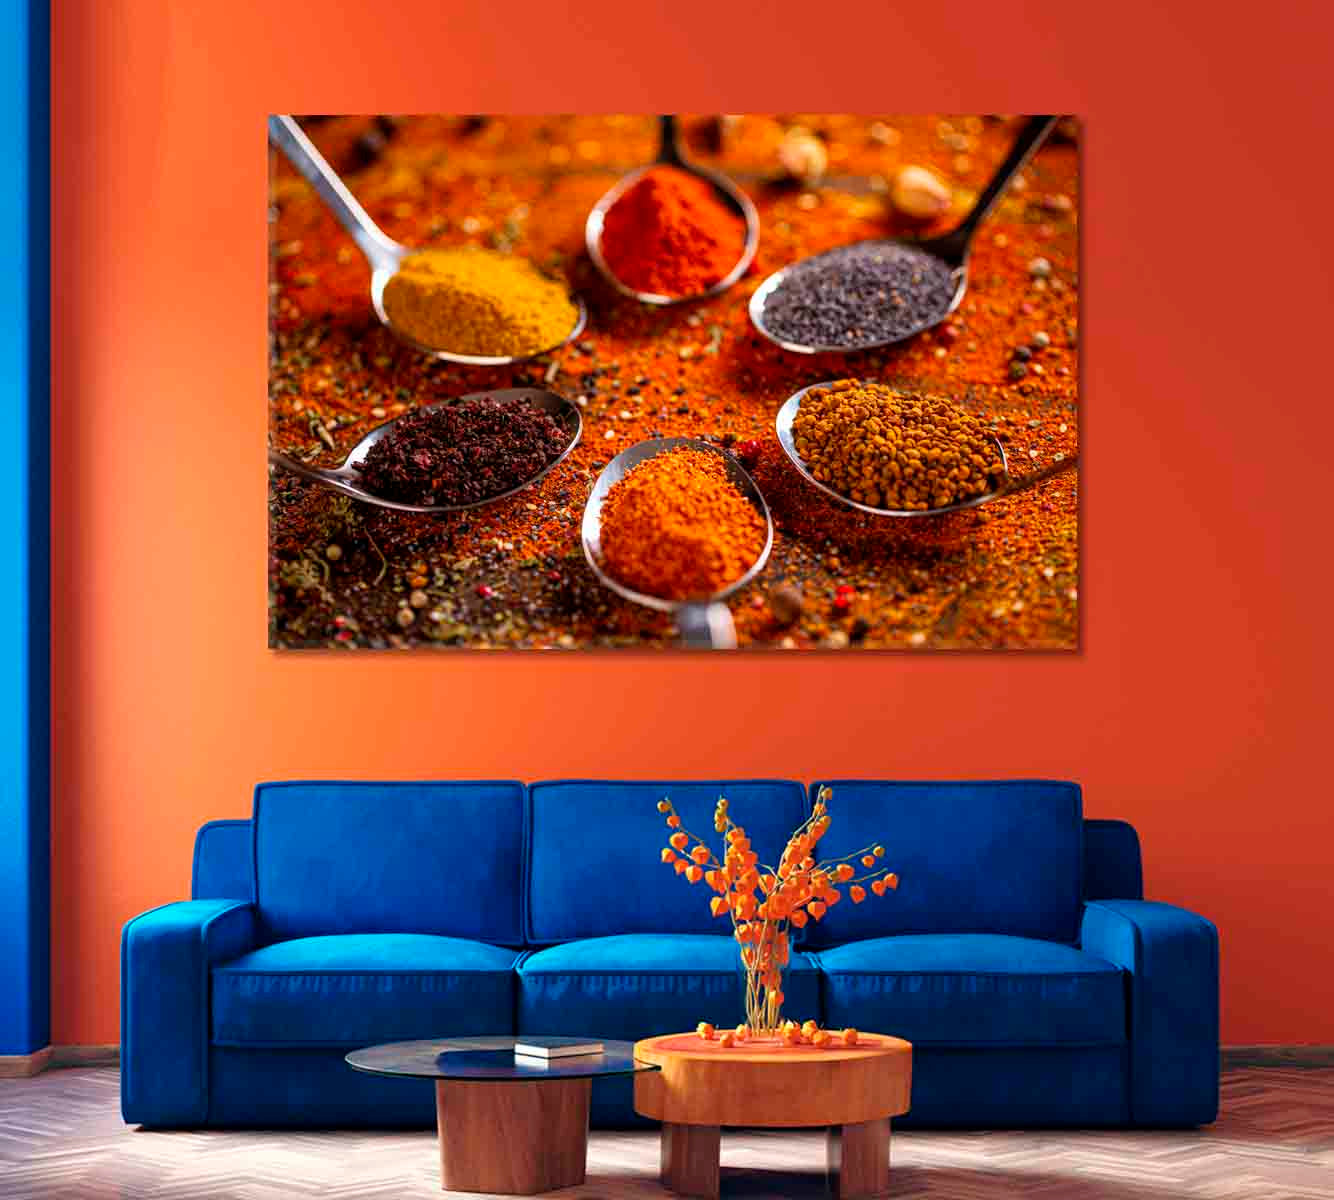 Spice and Herb Canvas Print-Canvas Print-CetArt-1 Panel-24x16 inches-CetArt